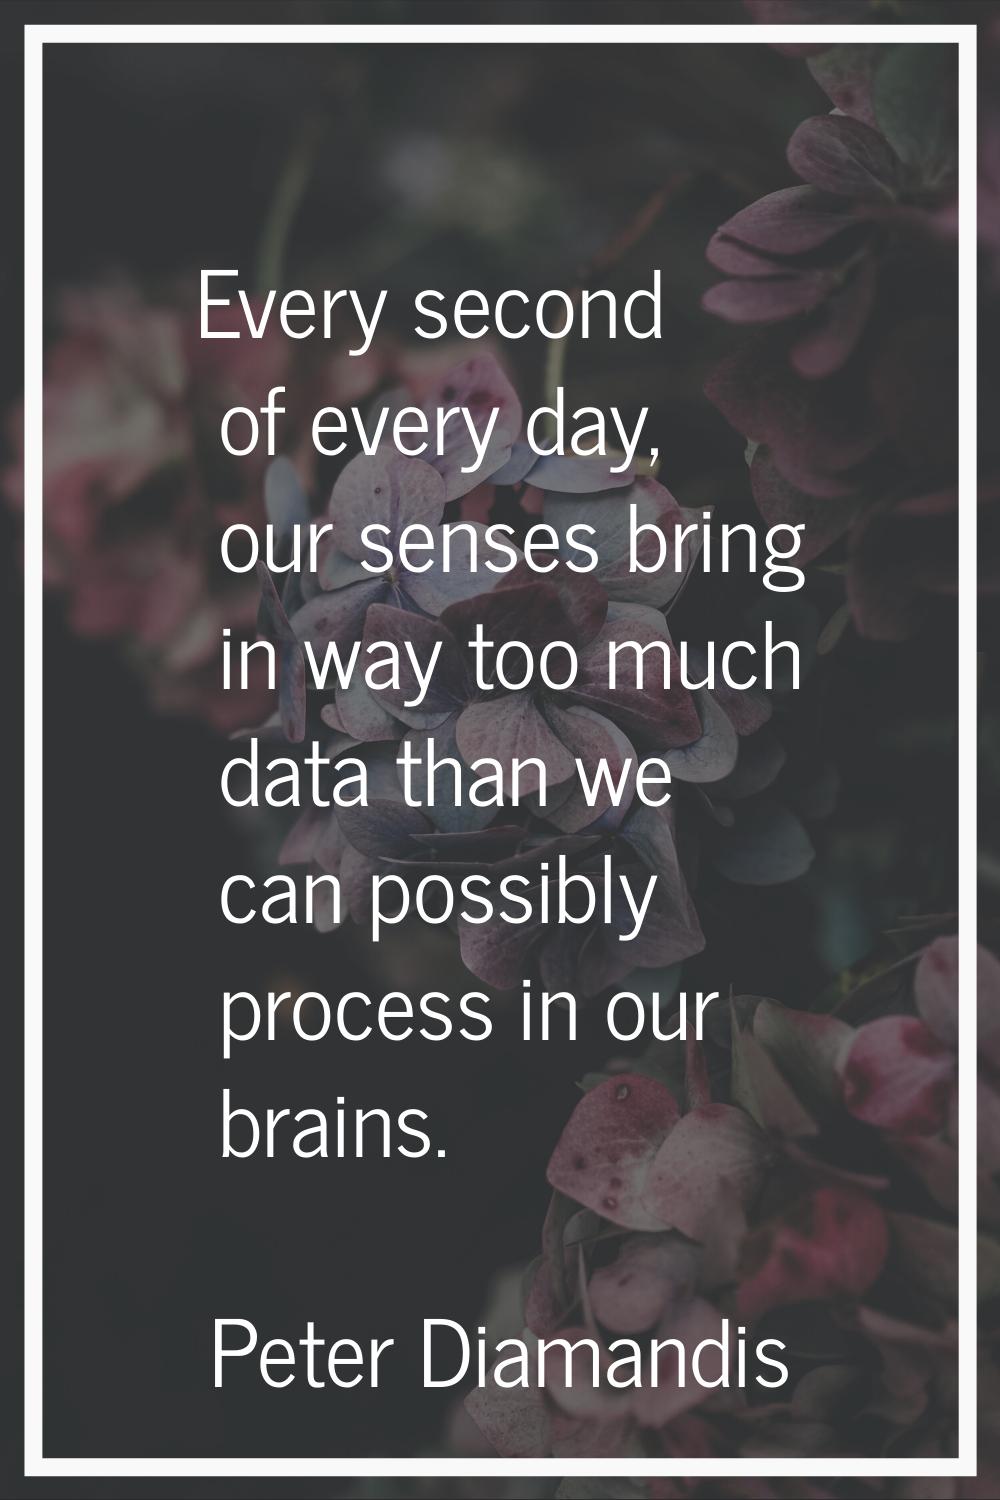 Every second of every day, our senses bring in way too much data than we can possibly process in ou